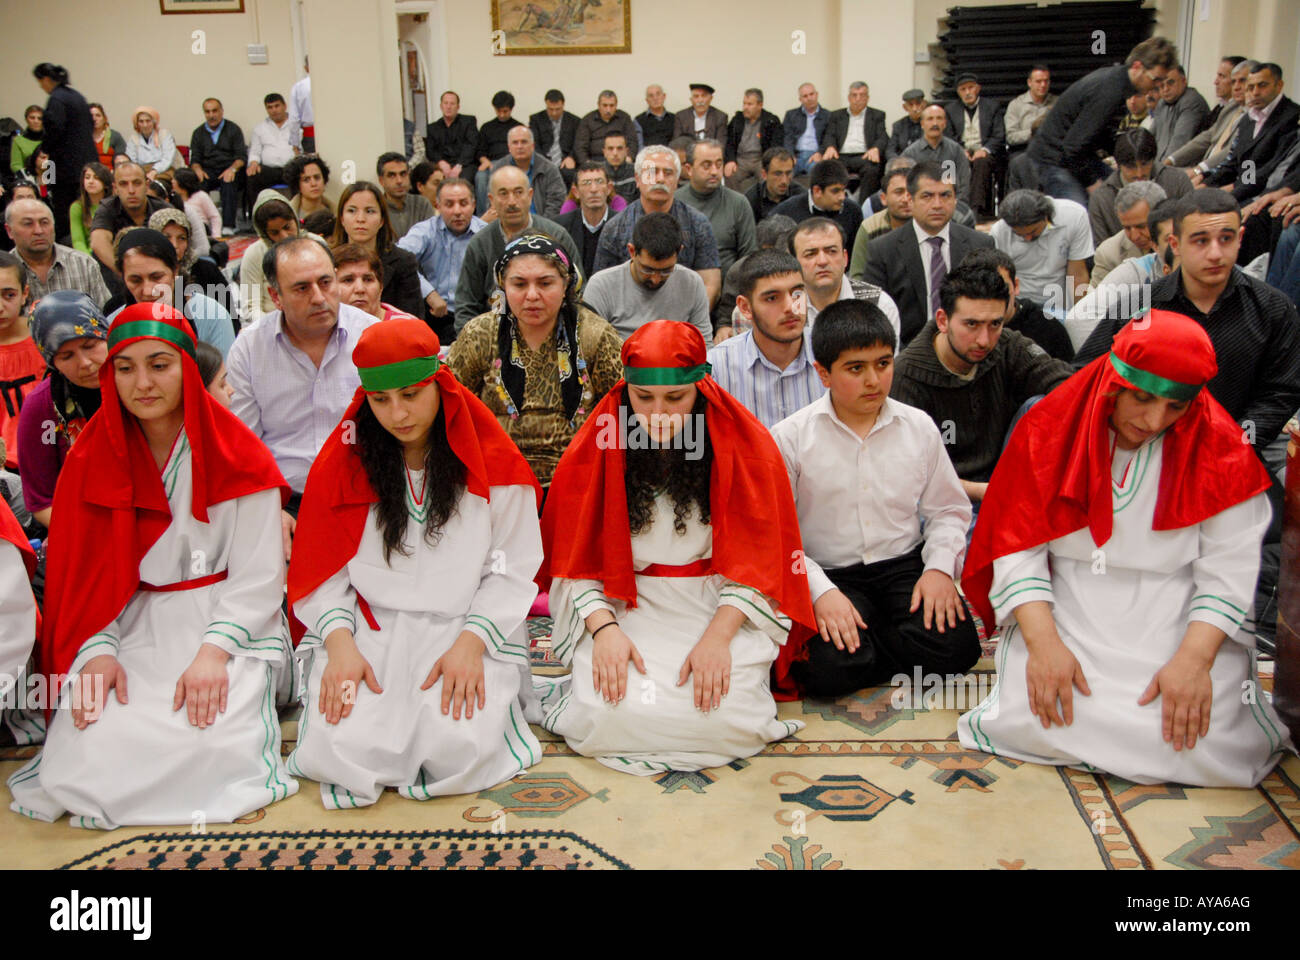 TURKISH FEMALE ALEVIS IN SEMAH CERAMONY,IN ALEVIS CULTURAL CENTER IN NORTH LONDON Stock Photo